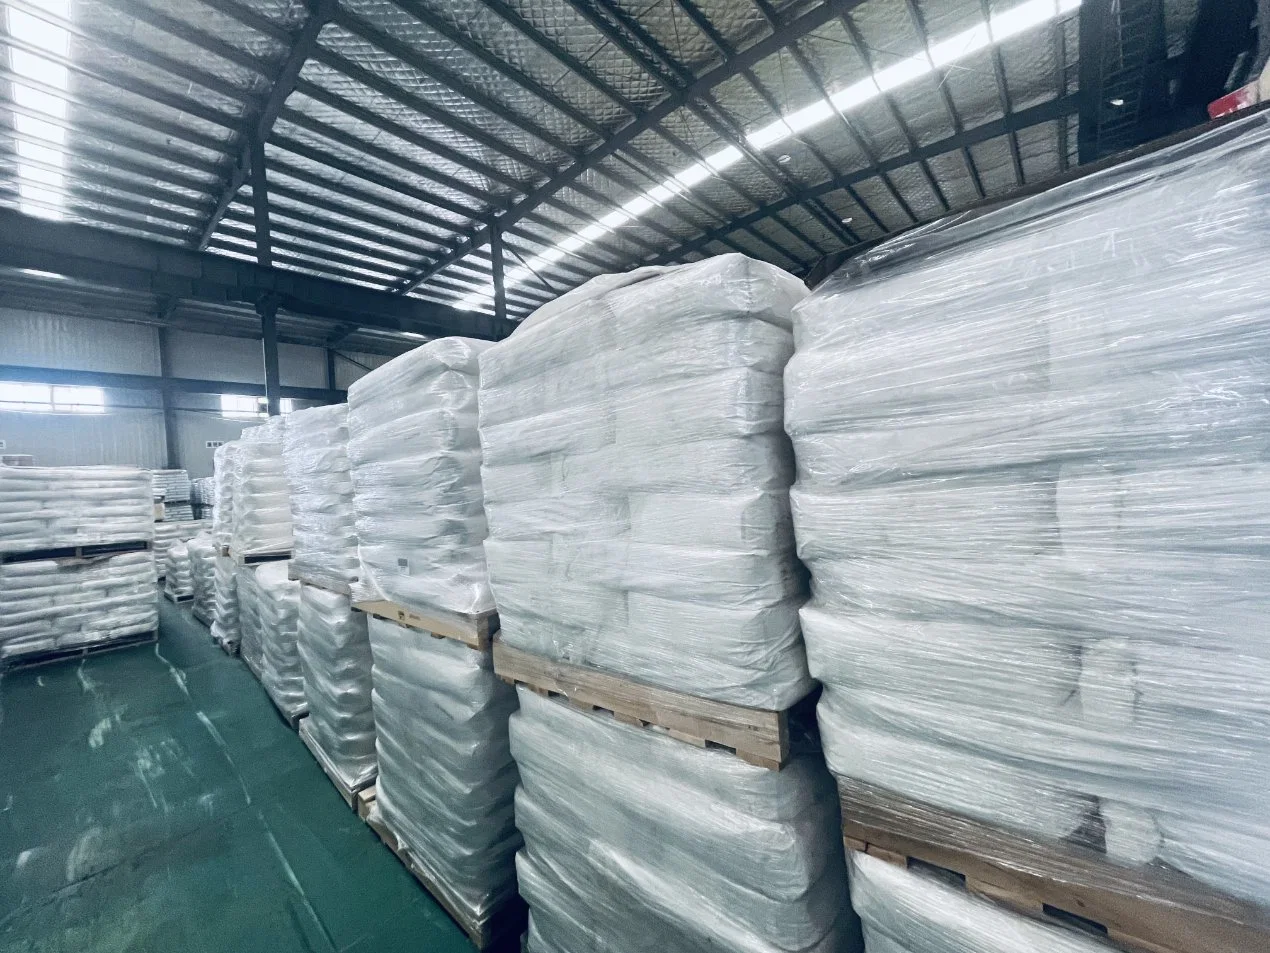 Industrial Grade Titanium Dioxide Linhaw Lhr-986 Widely Used in Paint, Plastic, Ink, Paper Making, Coatings, Rubber